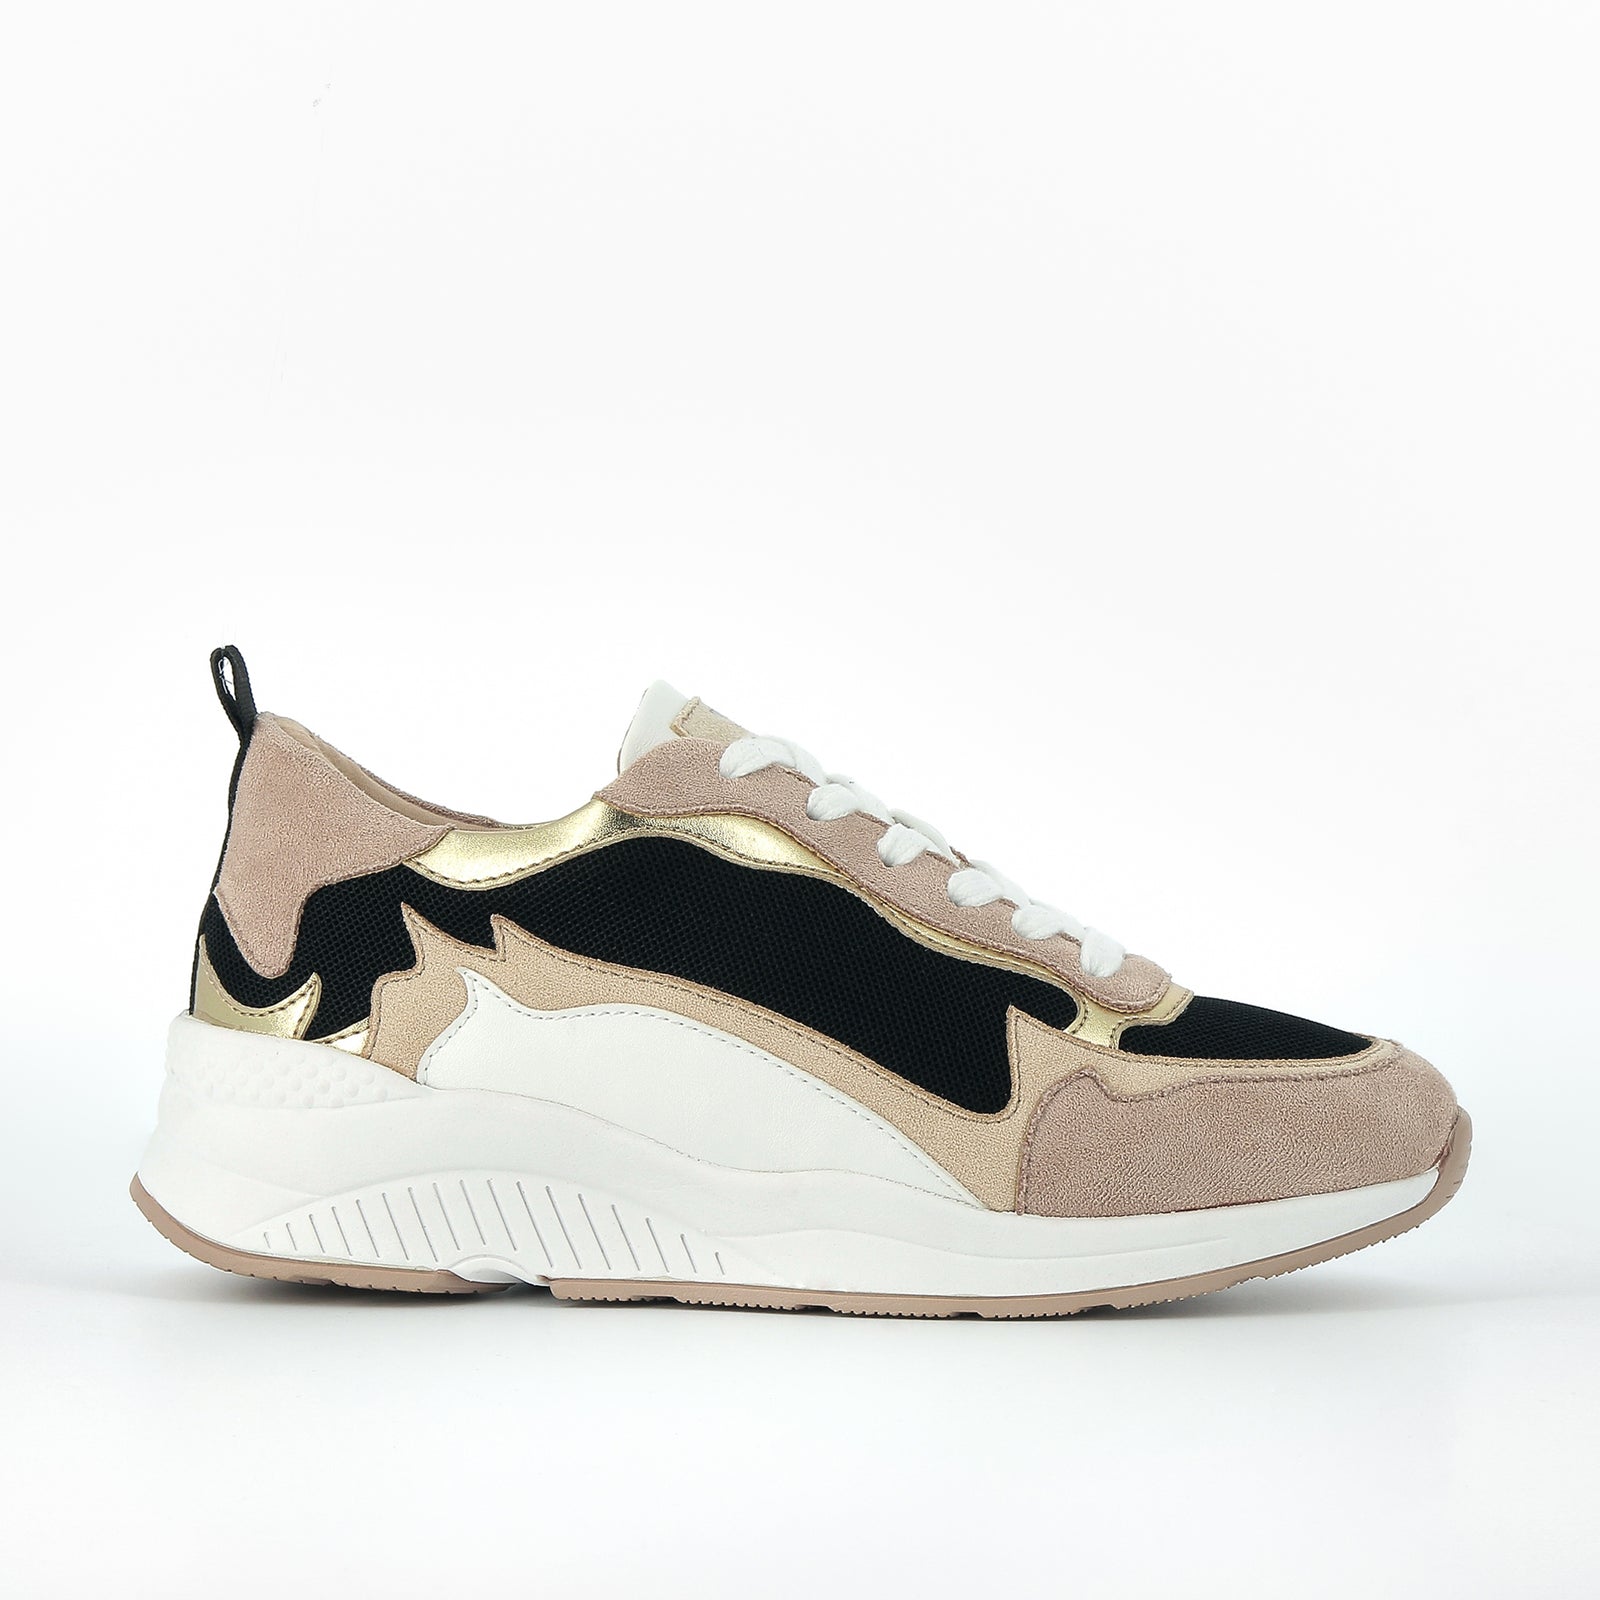 Beige and black sneakers with flame cutouts Vanessa WU